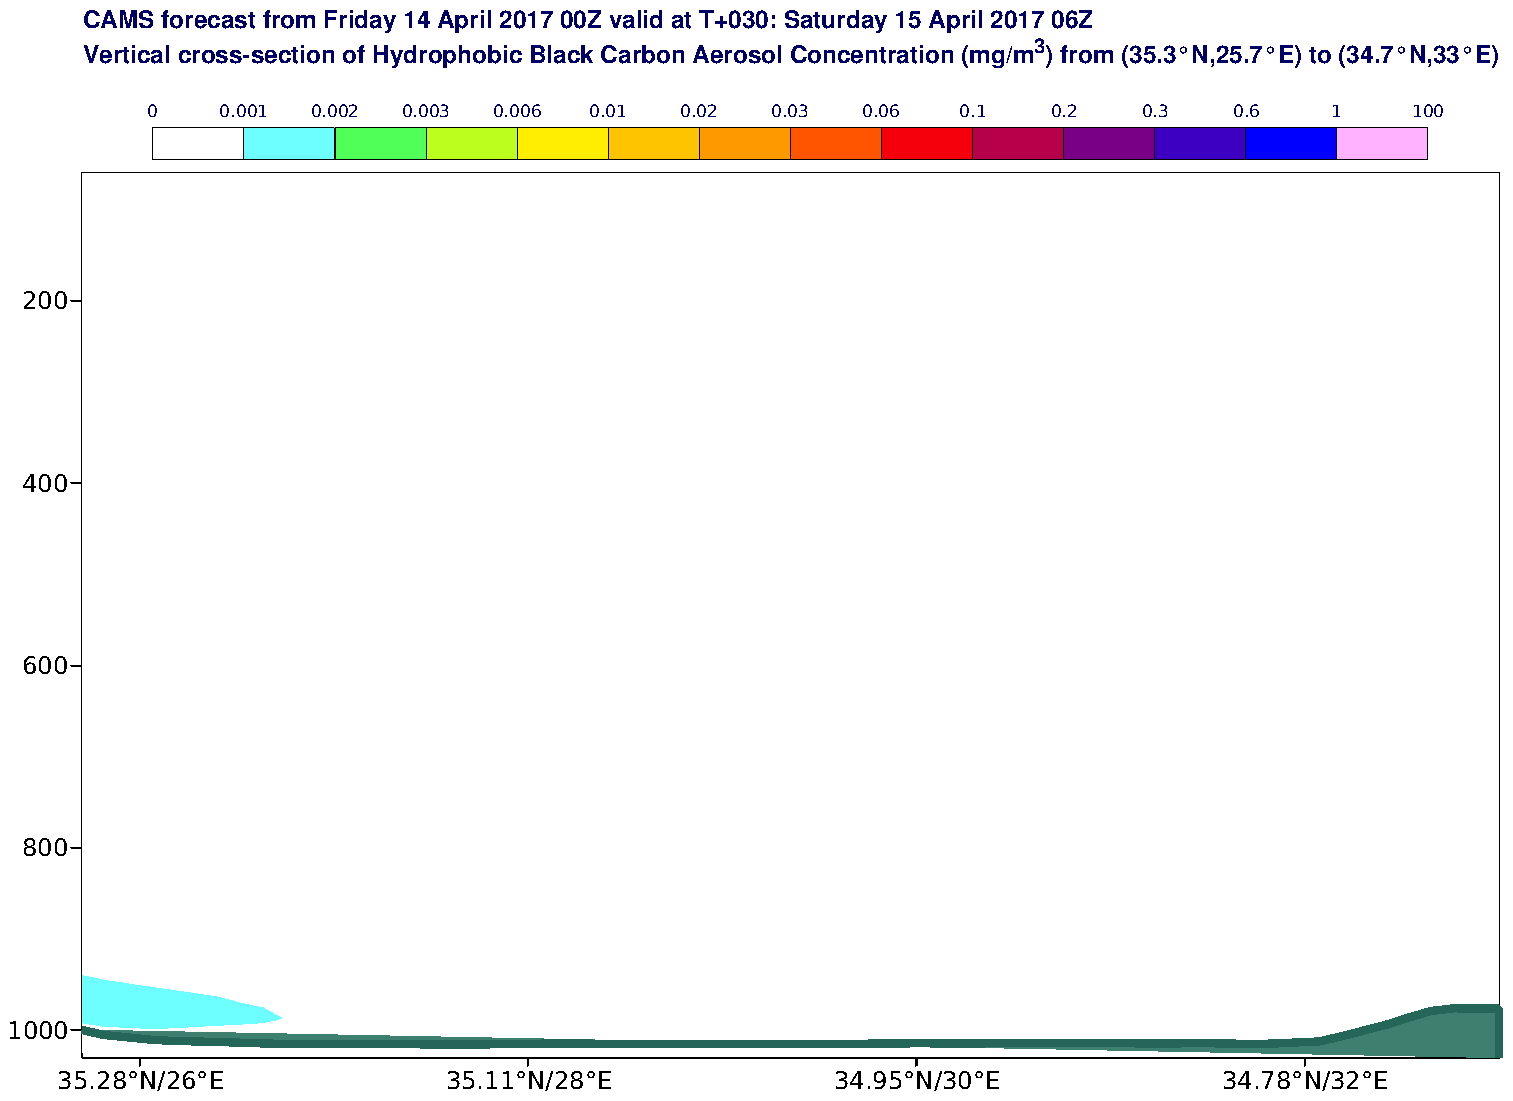 Vertical cross-section of Hydrophobic Black Carbon Aerosol Concentration (mg/m3) valid at T30 - 2017-04-15 06:00